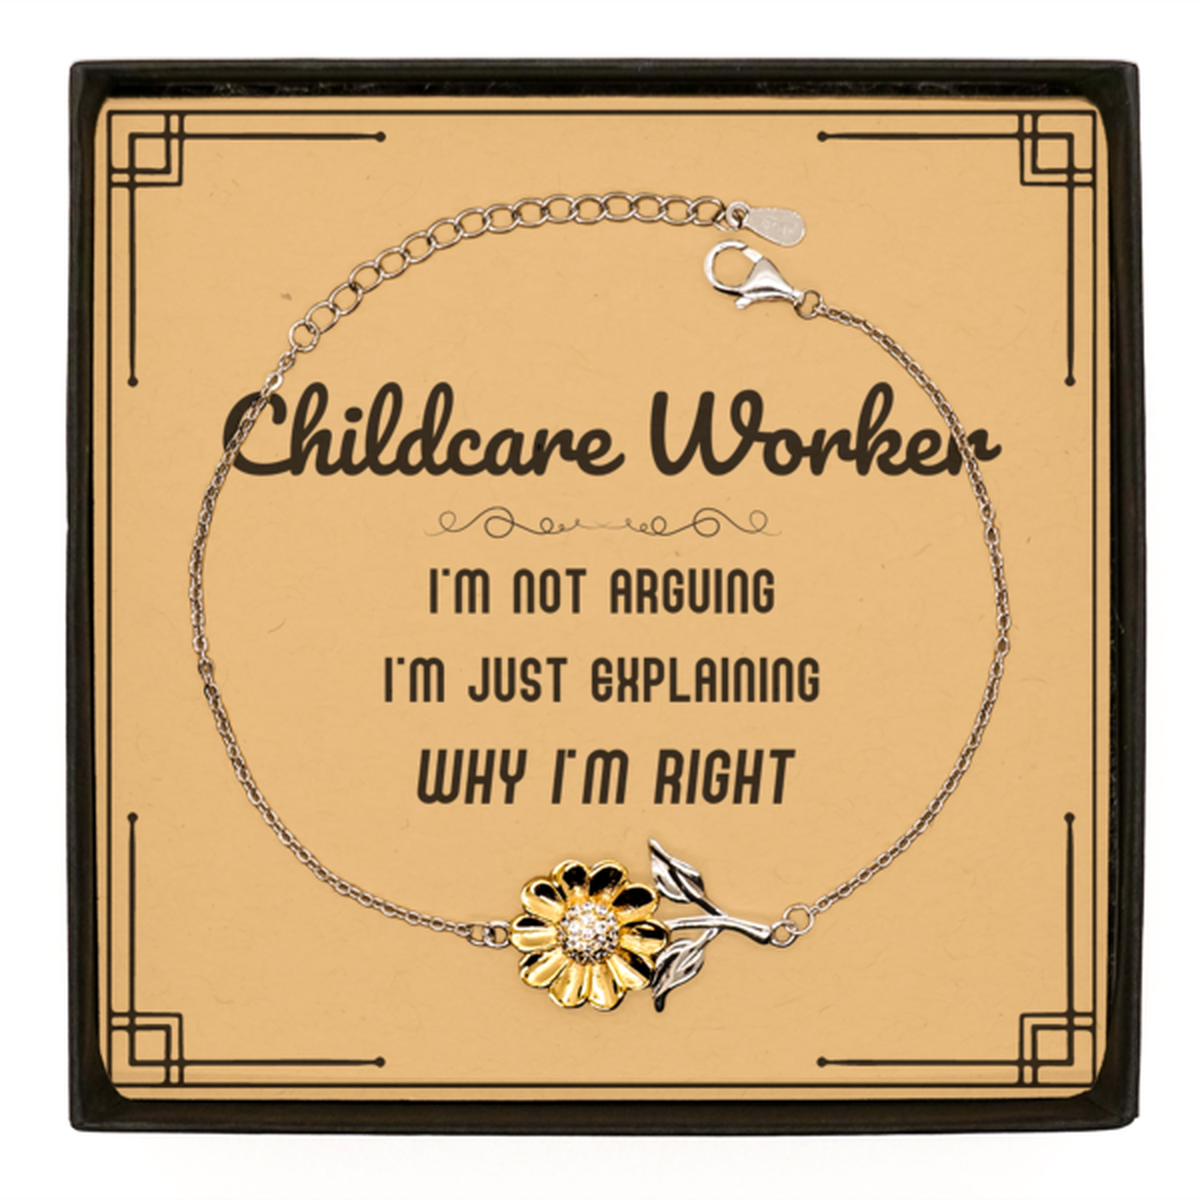 Childcare Worker I'm not Arguing. I'm Just Explaining Why I'm RIGHT Sunflower Bracelet, Funny Saying Quote Childcare Worker Gifts For Childcare Worker Message Card Graduation Birthday Christmas Gifts for Men Women Coworker